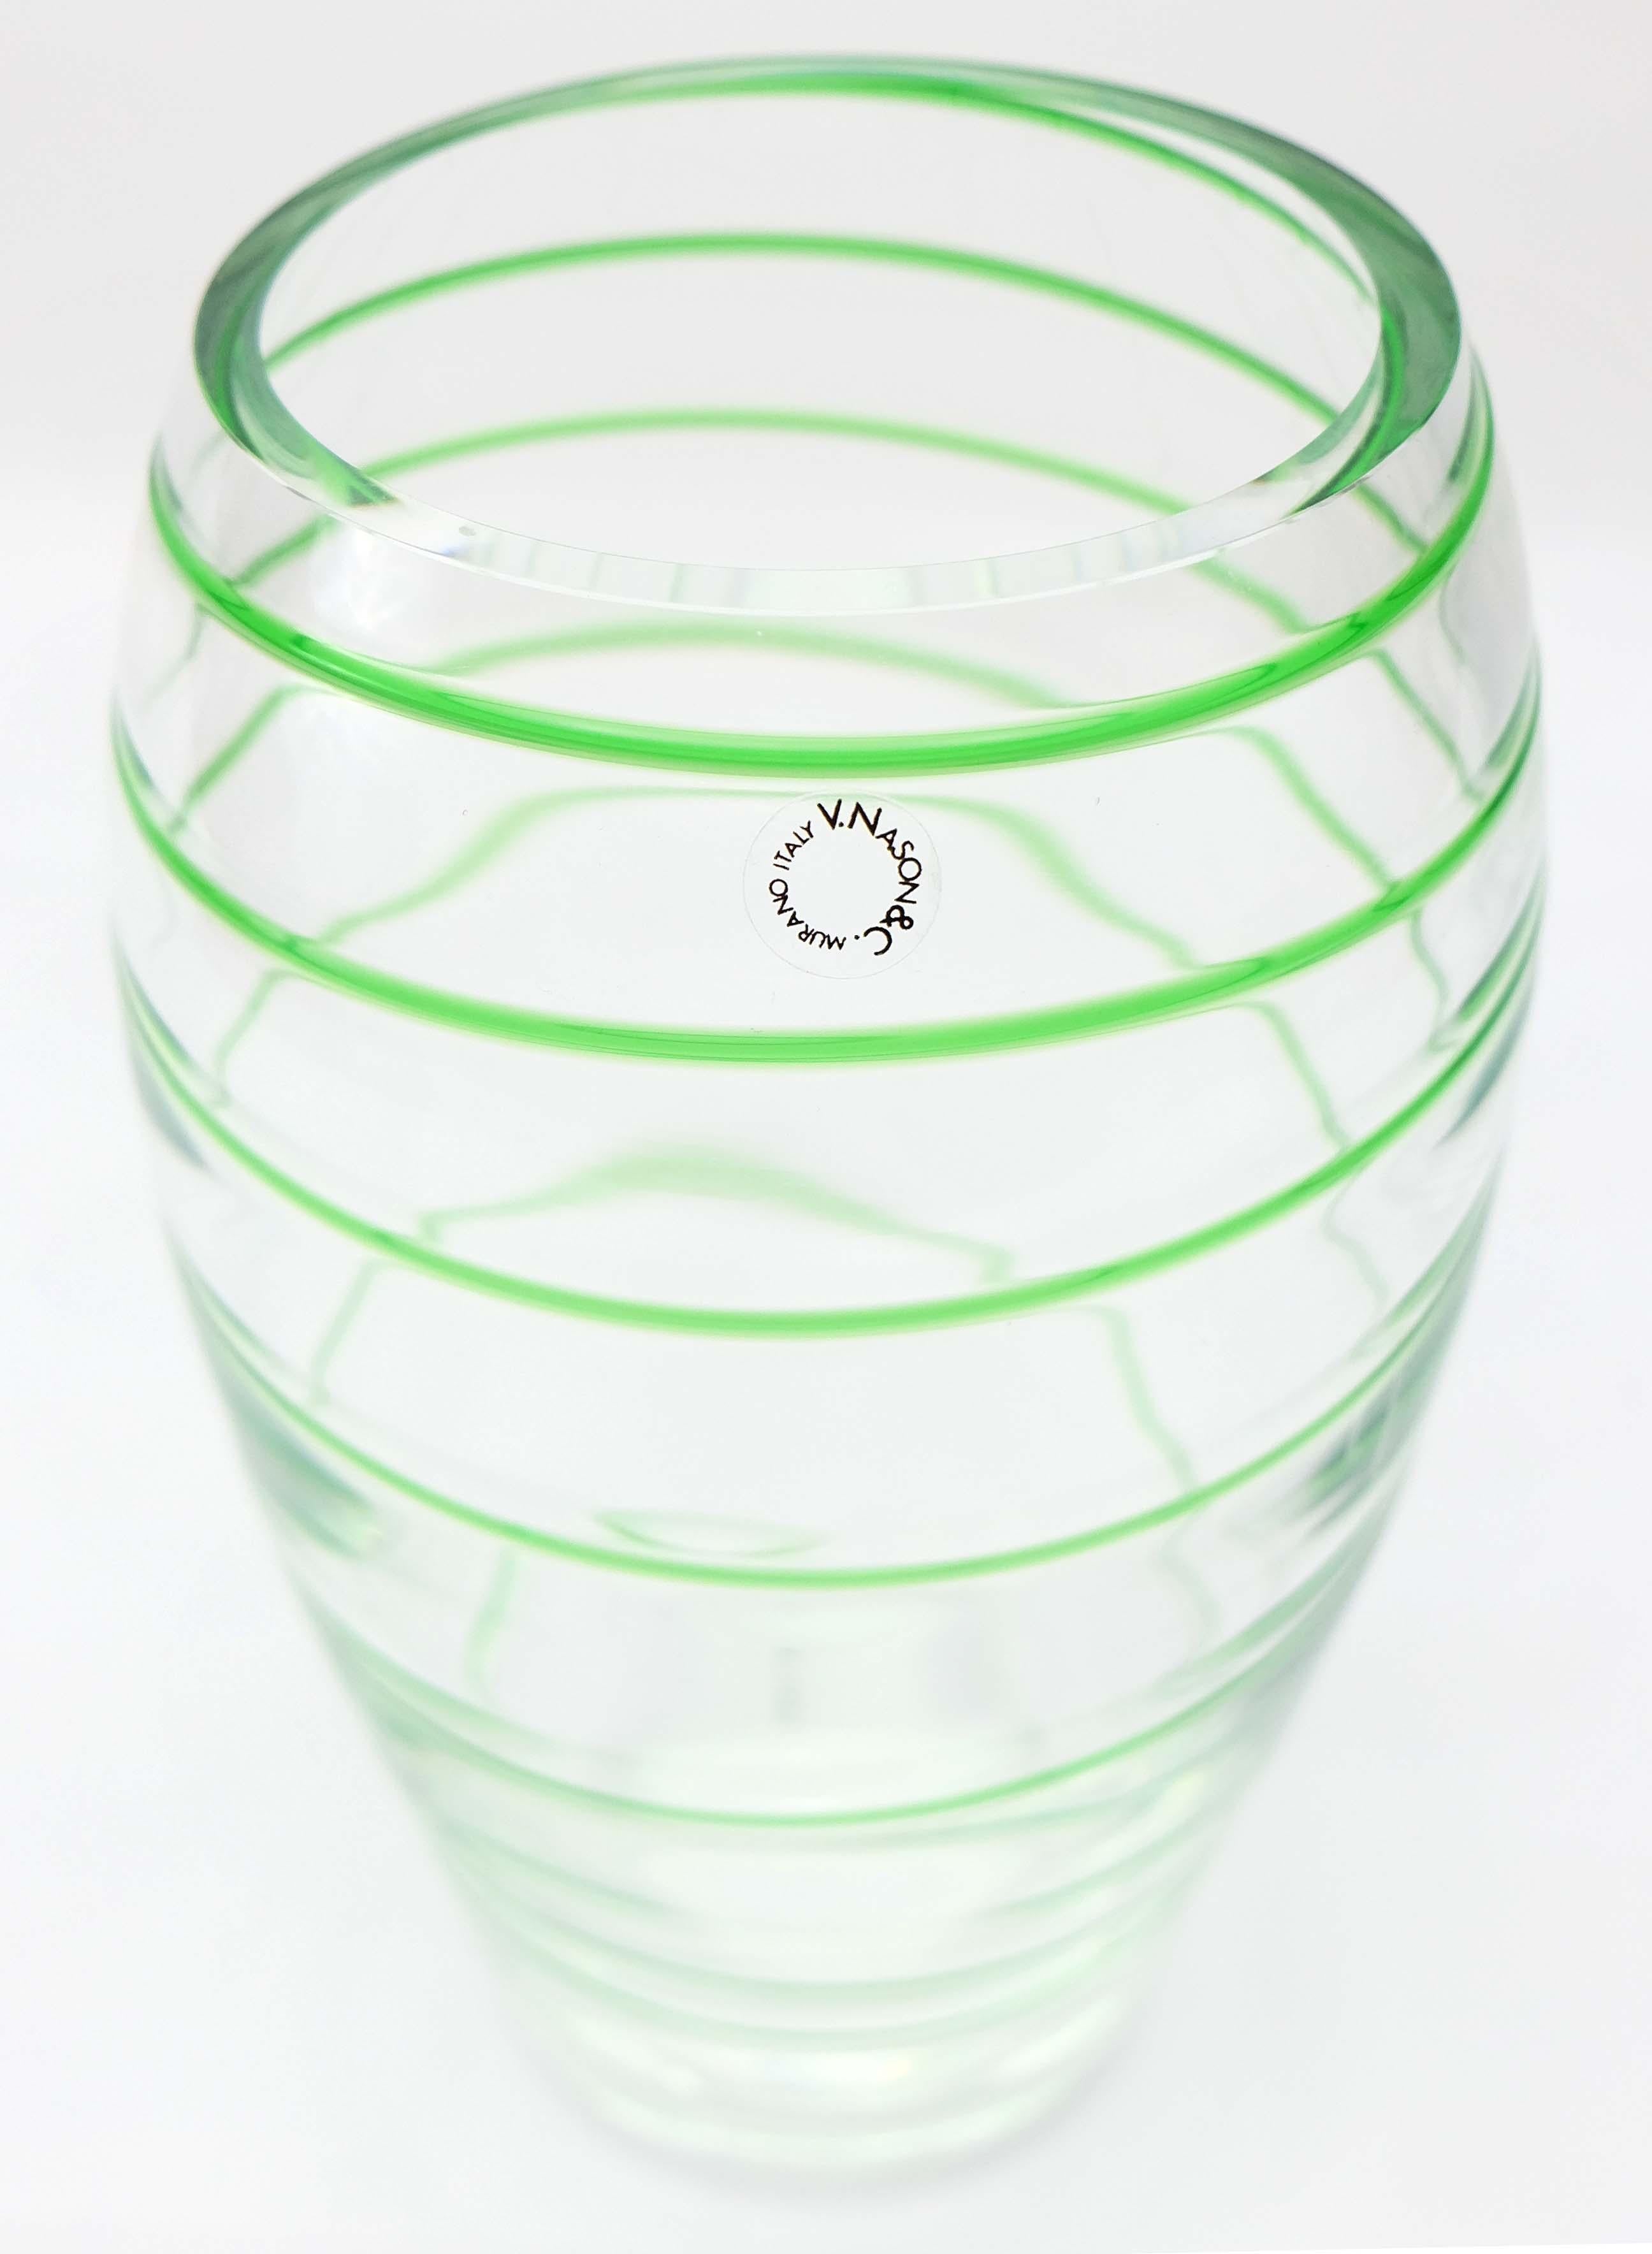 Murano Glass Vase by V. Nason & Co.Italy, Green Swirl Stripe

Offered for sale is an Italian green spiral stripe Murano glass vase by V. Nason & Co. This mouth-blown glass vase is in a transparent and green spiral color and retains the original